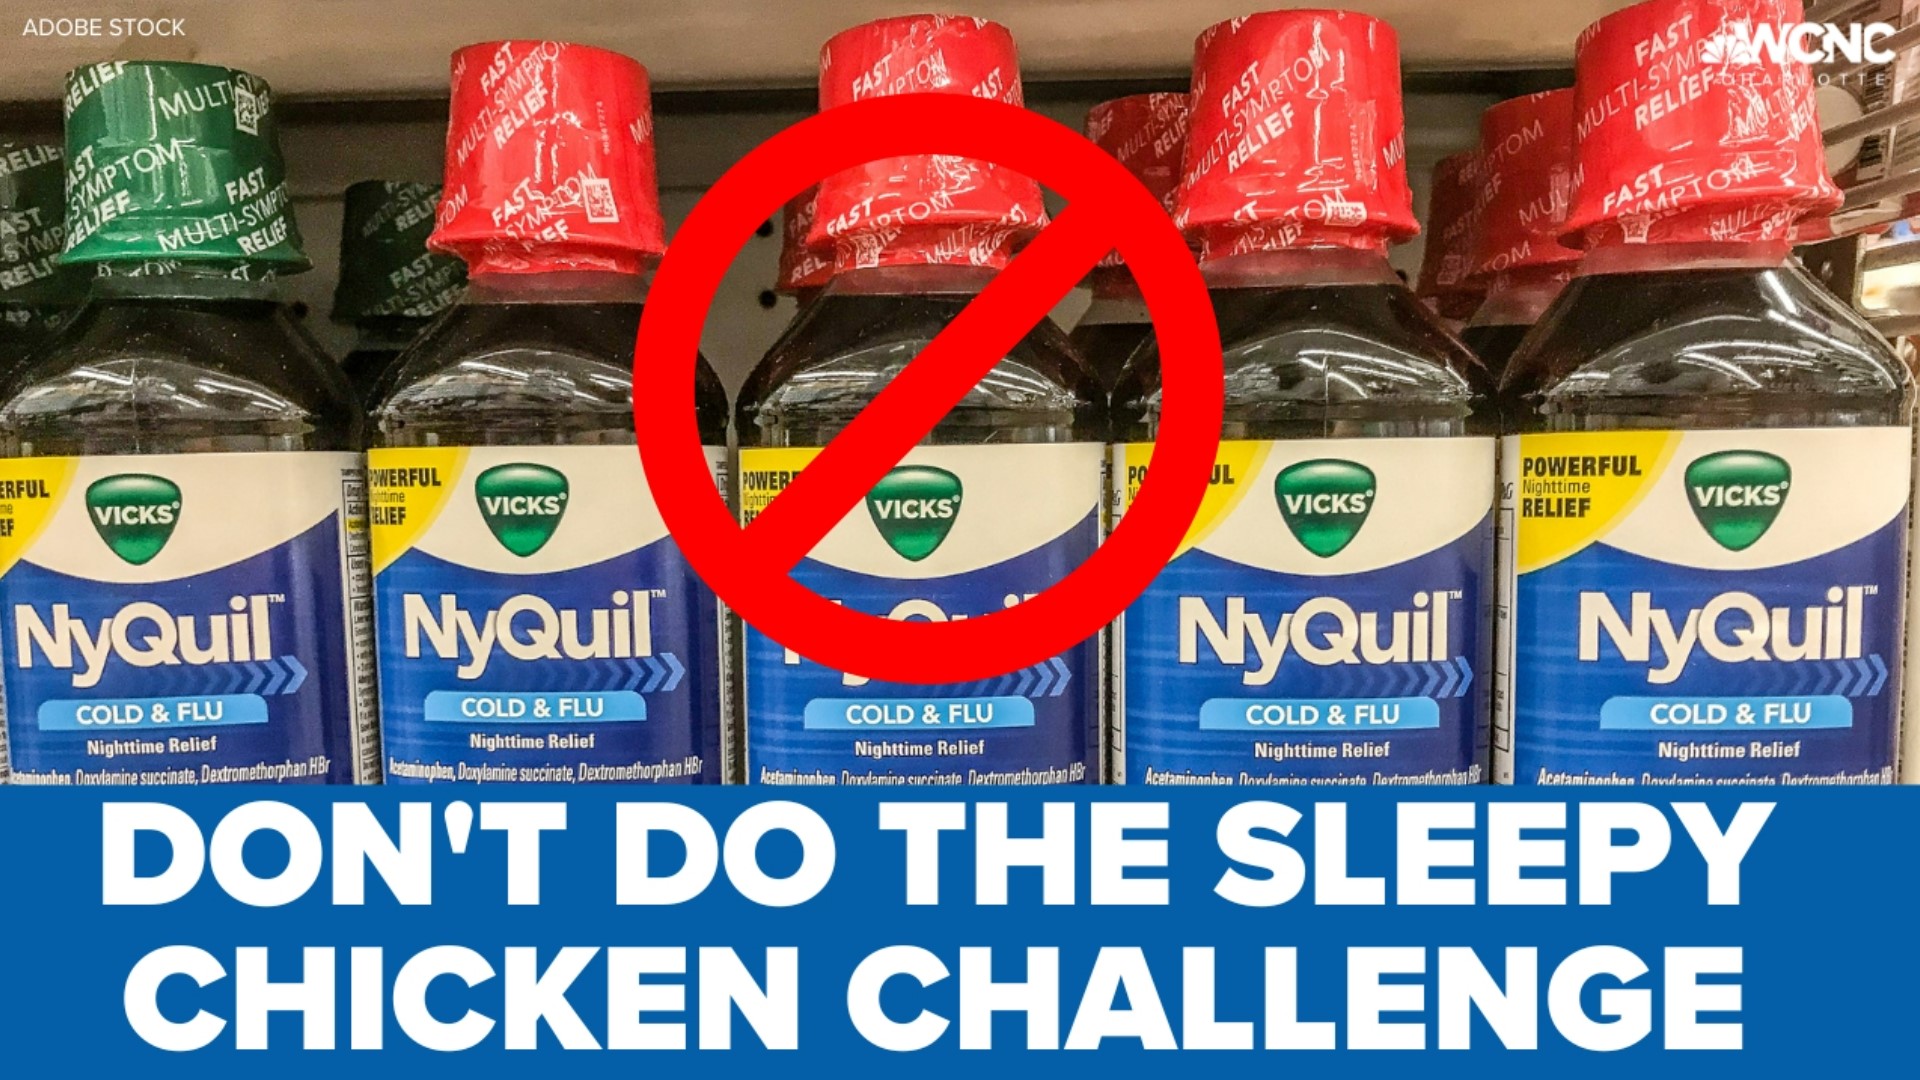 A bizarre social media trend dubbed “NyQuil chicken” or “sleepy chicken” appears to be making the rounds online, prompting questions and warnings from many people.